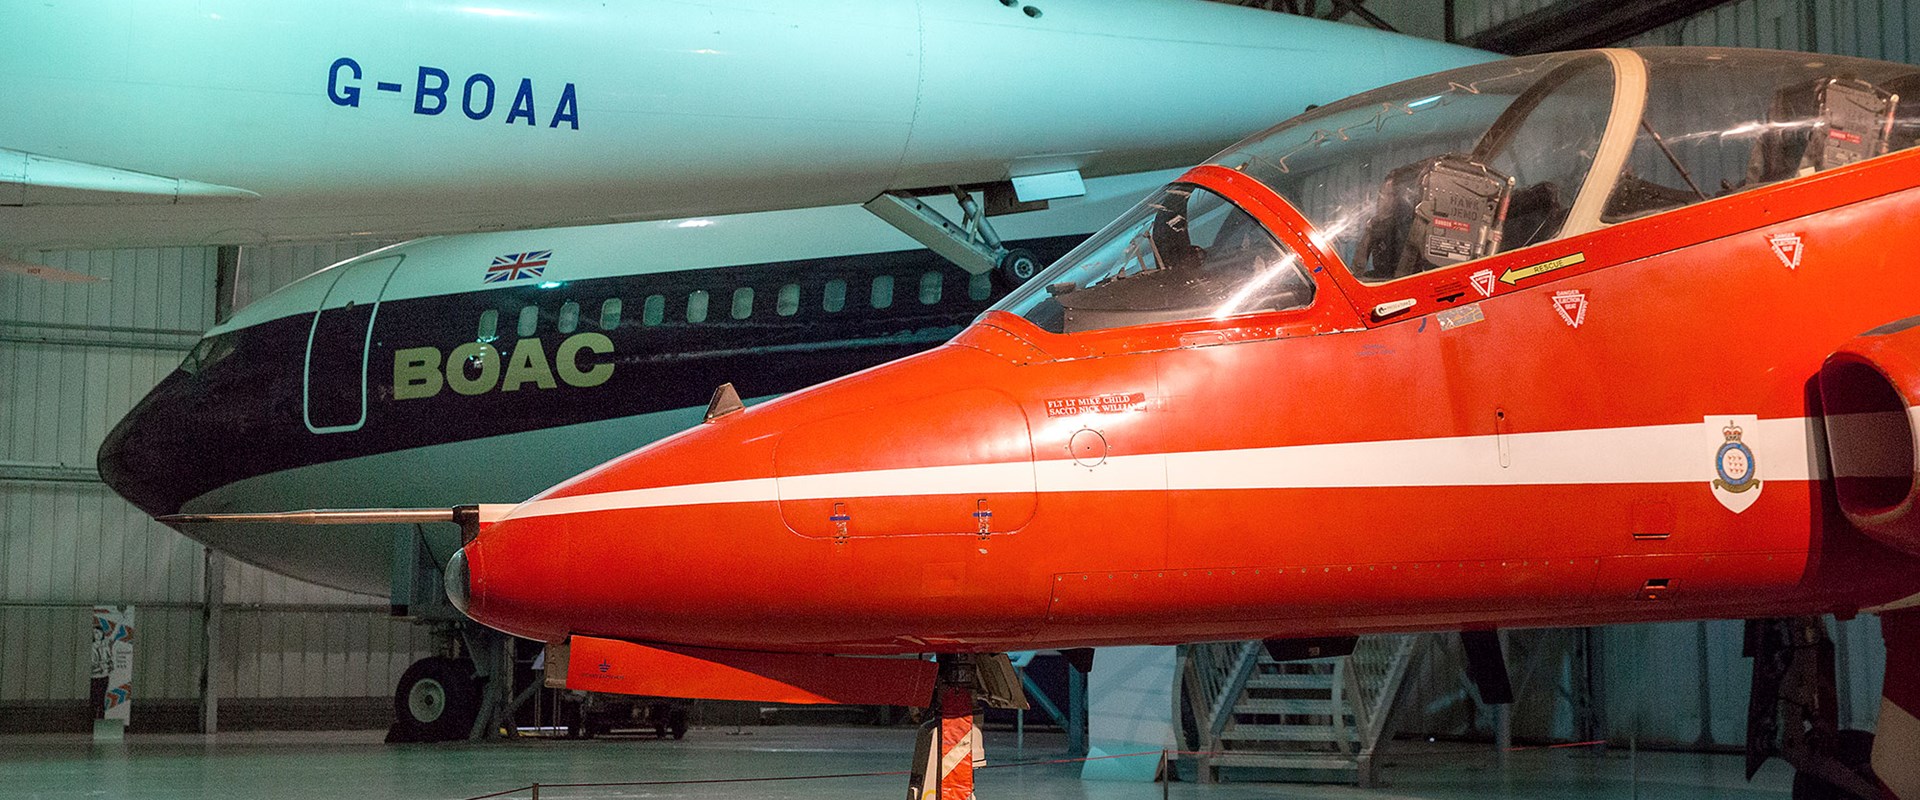 The frontend of the Red Arrows Hawk at the National Museum of Flight